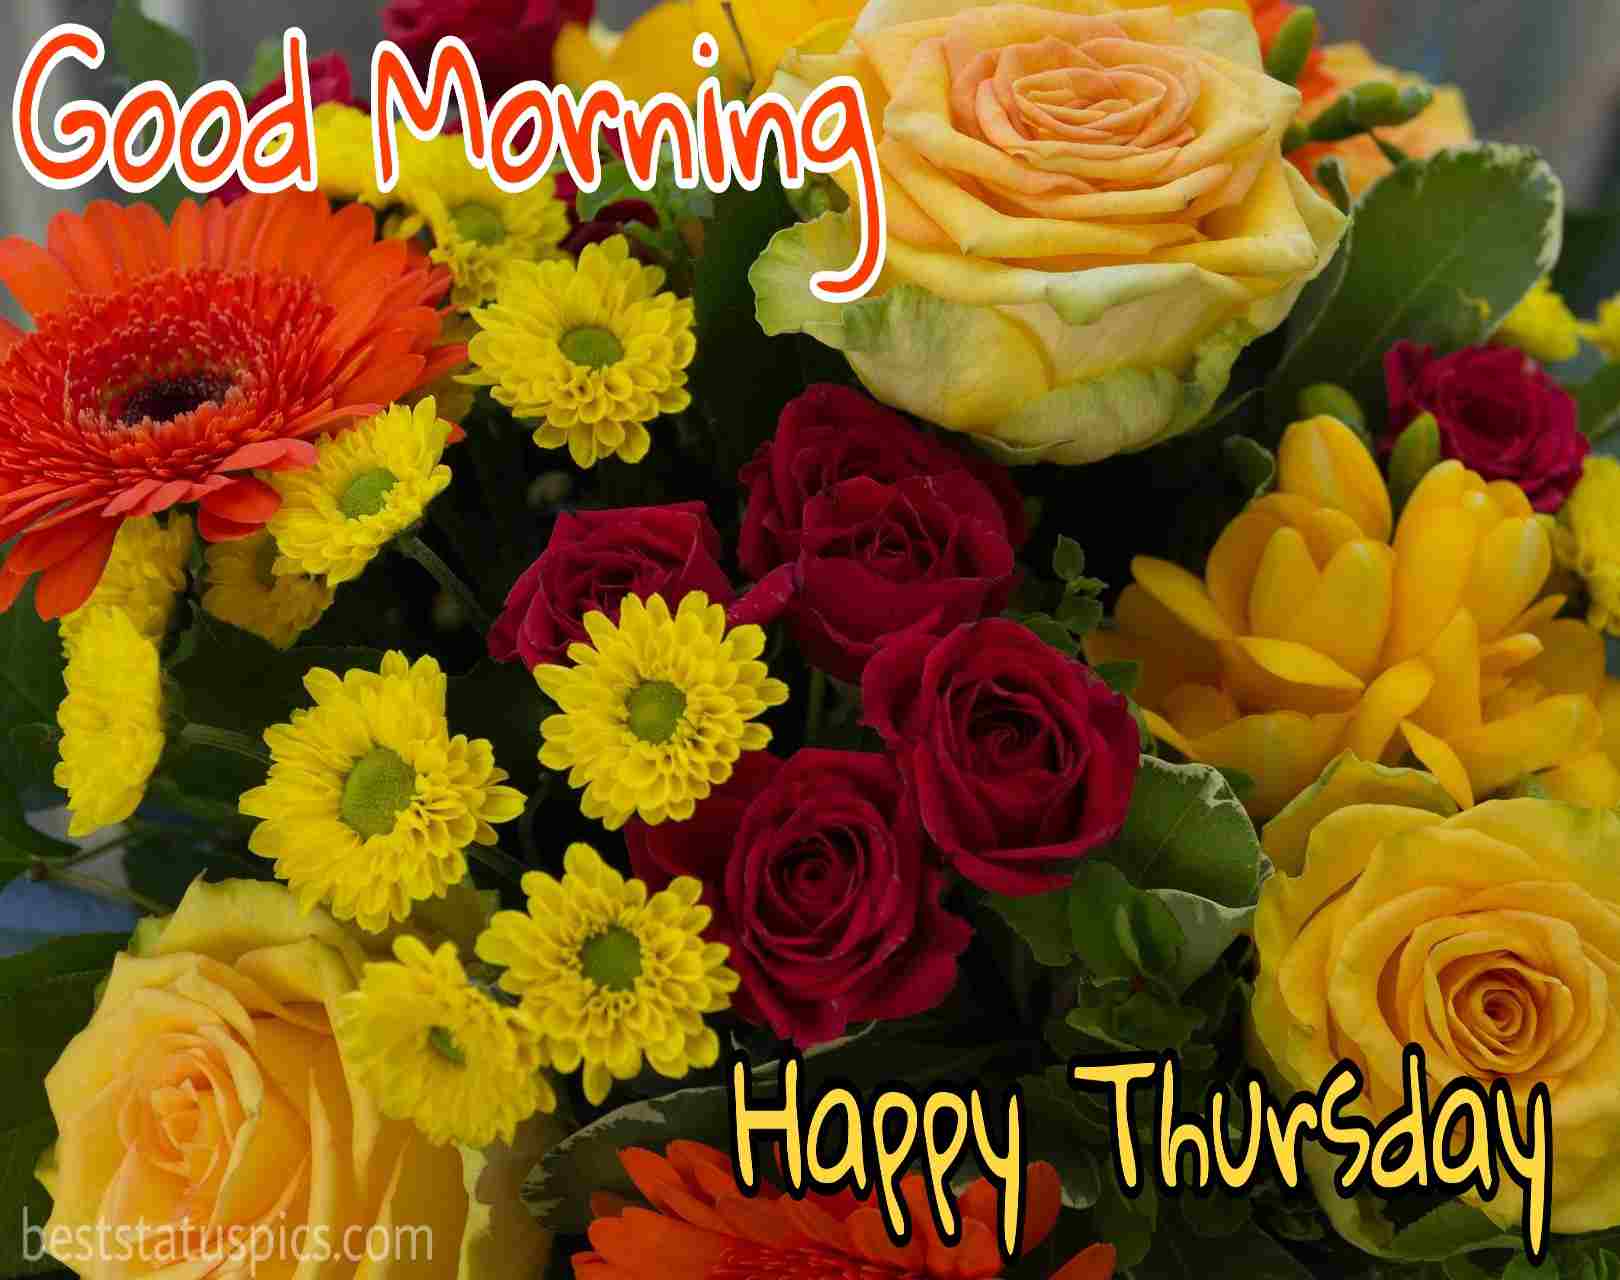 33+ Good Morning Happy Thursday Images, Wishes, Quotes